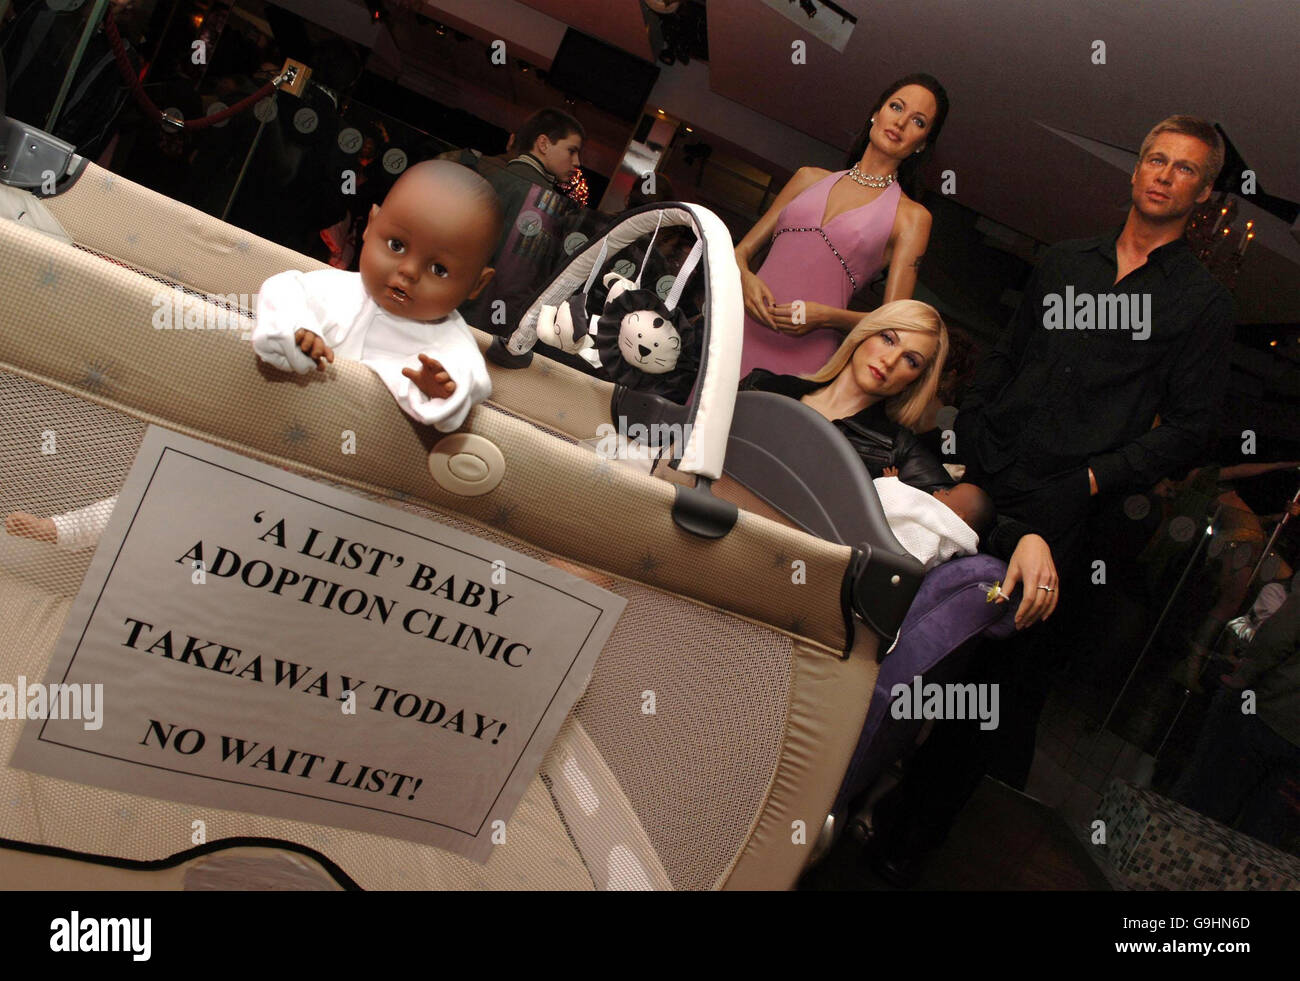 An exhibition themed around the celebrity baby adoption debate, featuring the Madonna, Brad Pitt & Angelina Jolie mannequins, at Madame Tussauds, central London. Stock Photo